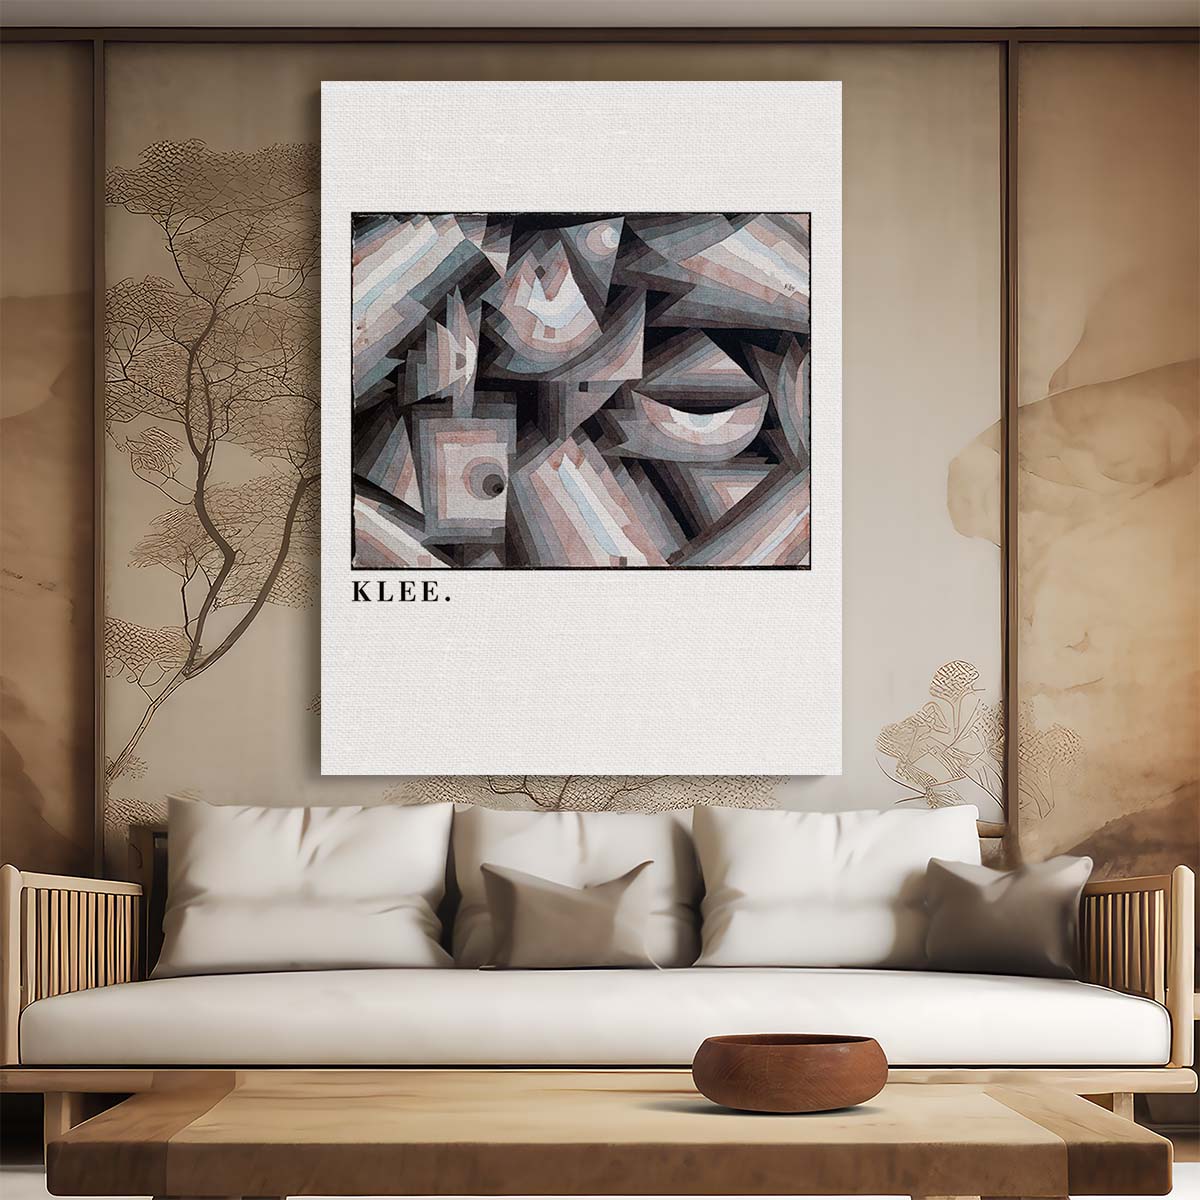 1921 Paul Klee Watercolor Abstract Illustration, Modern Art Poster by Luxuriance Designs, made in USA